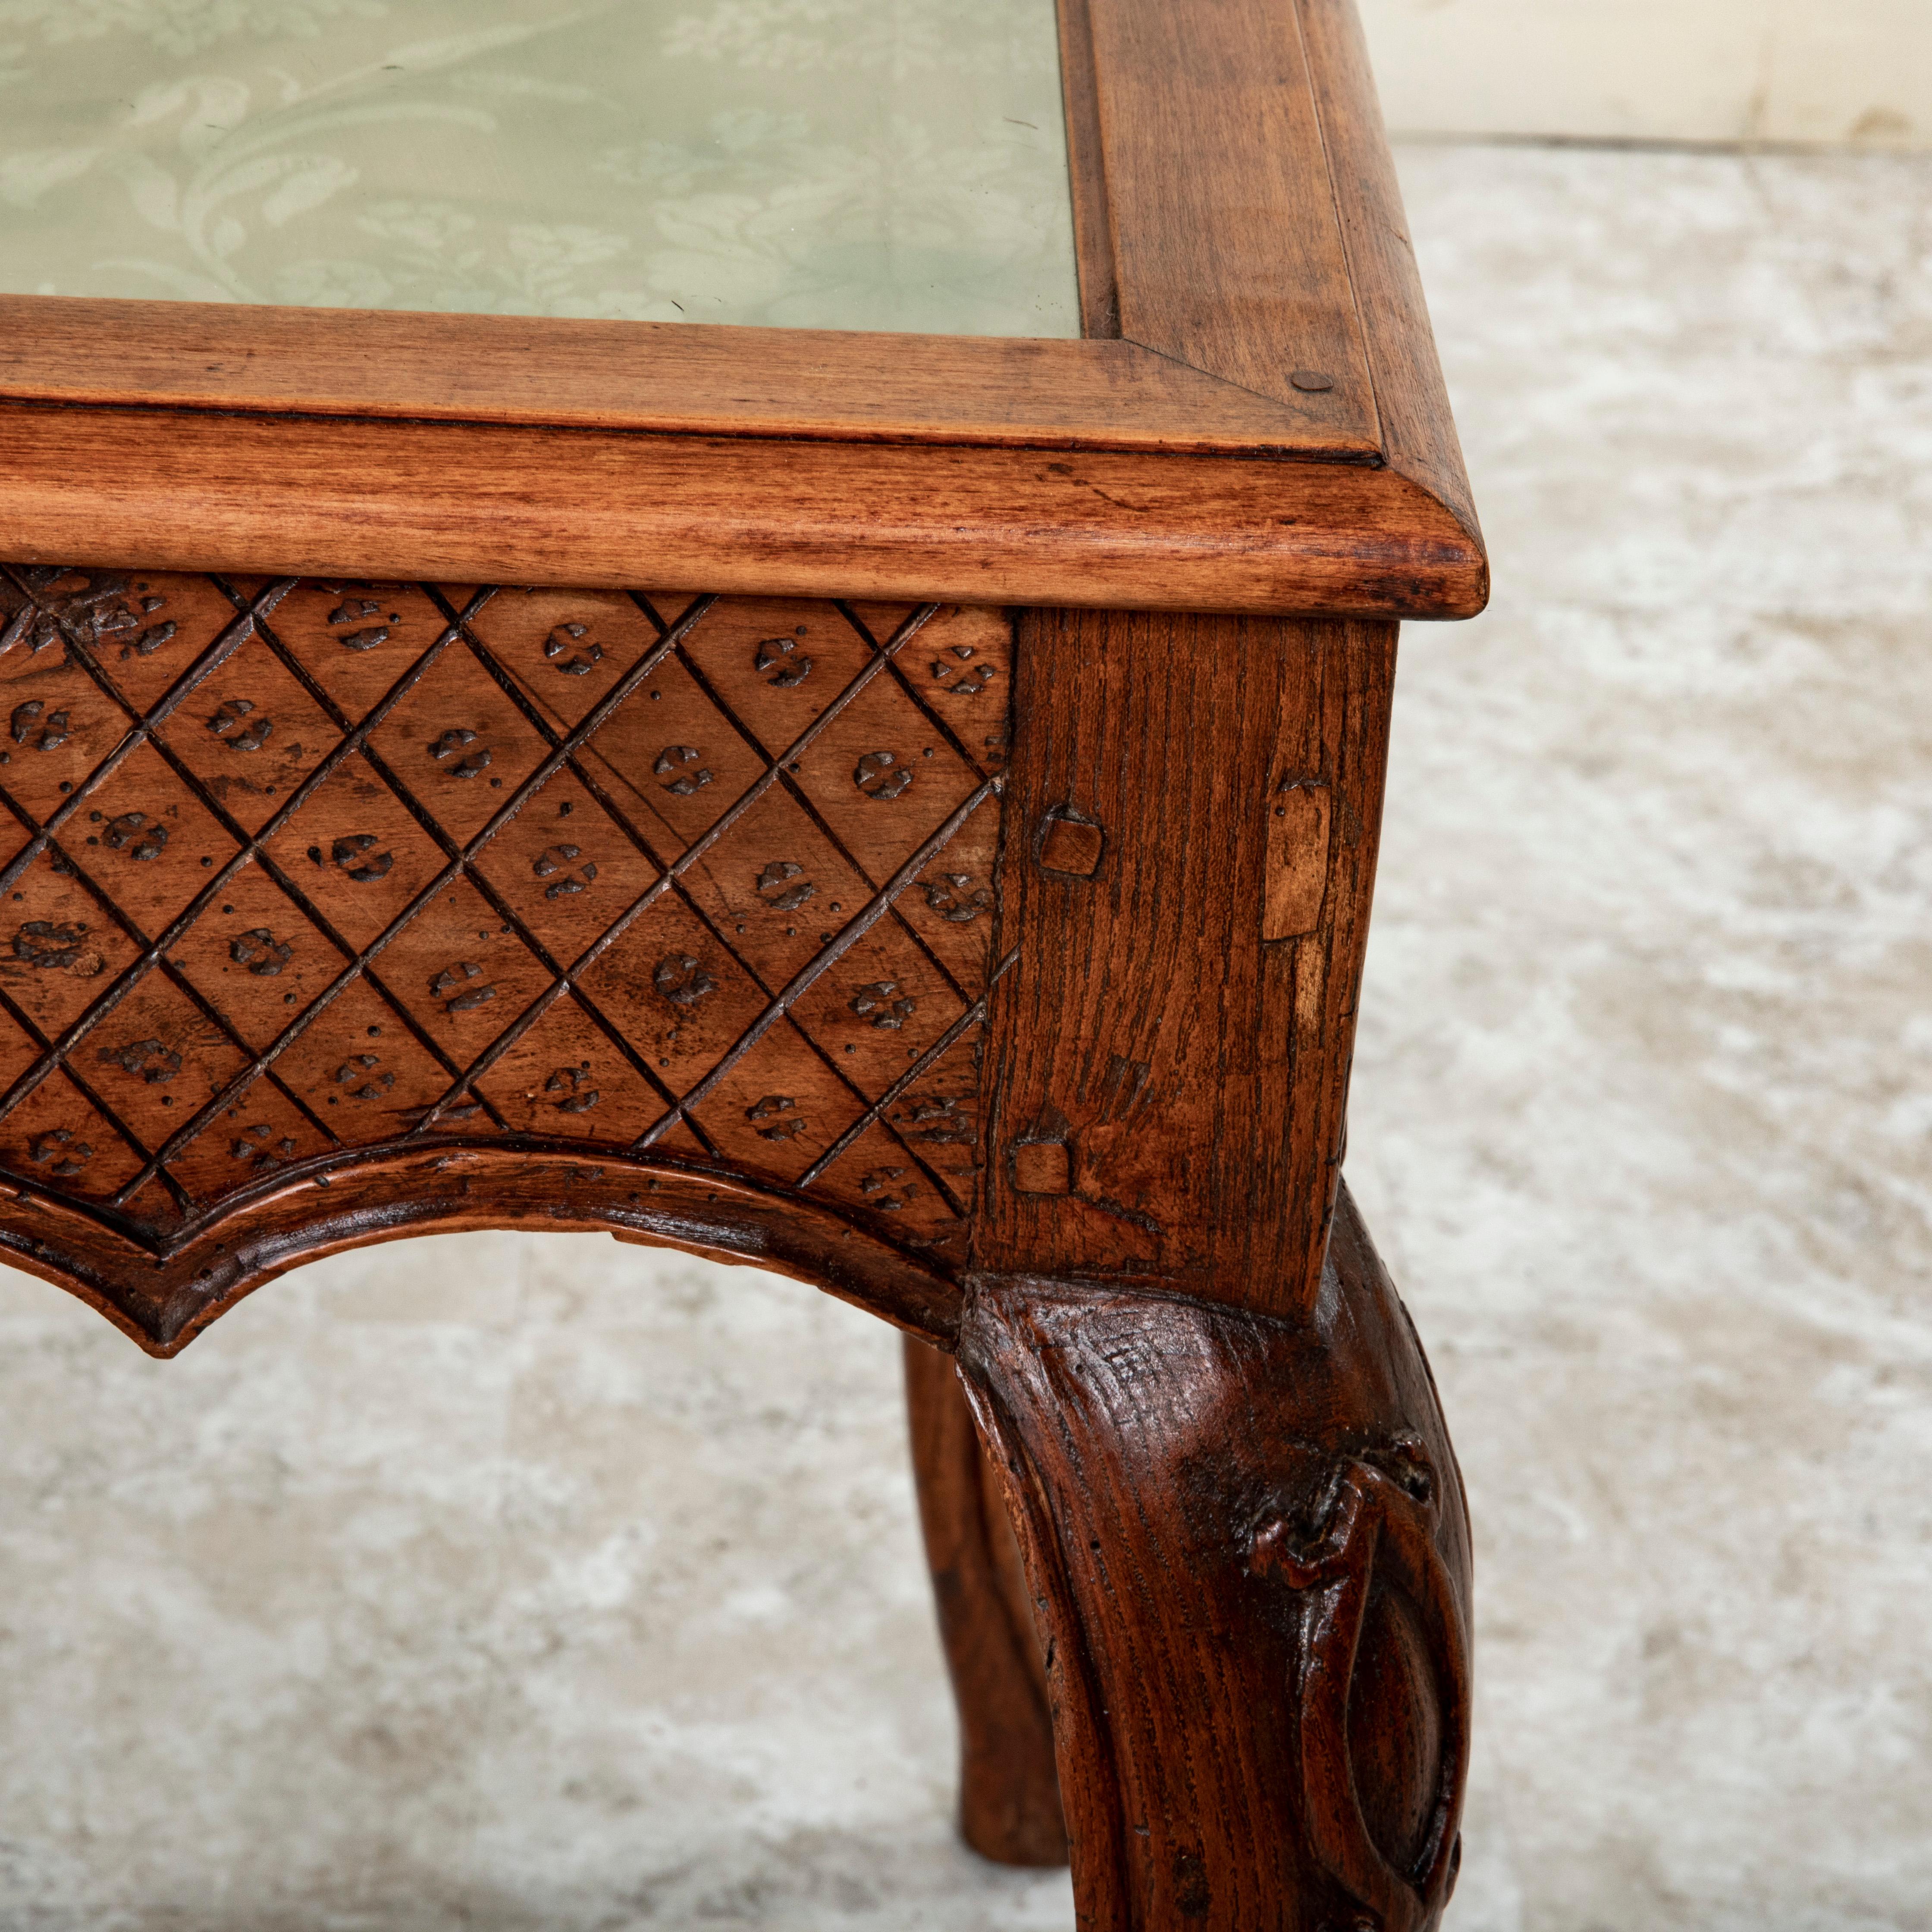 Late 19th Century French Regency Style Hand Carved Walnut Display Table, Vitrine For Sale 10